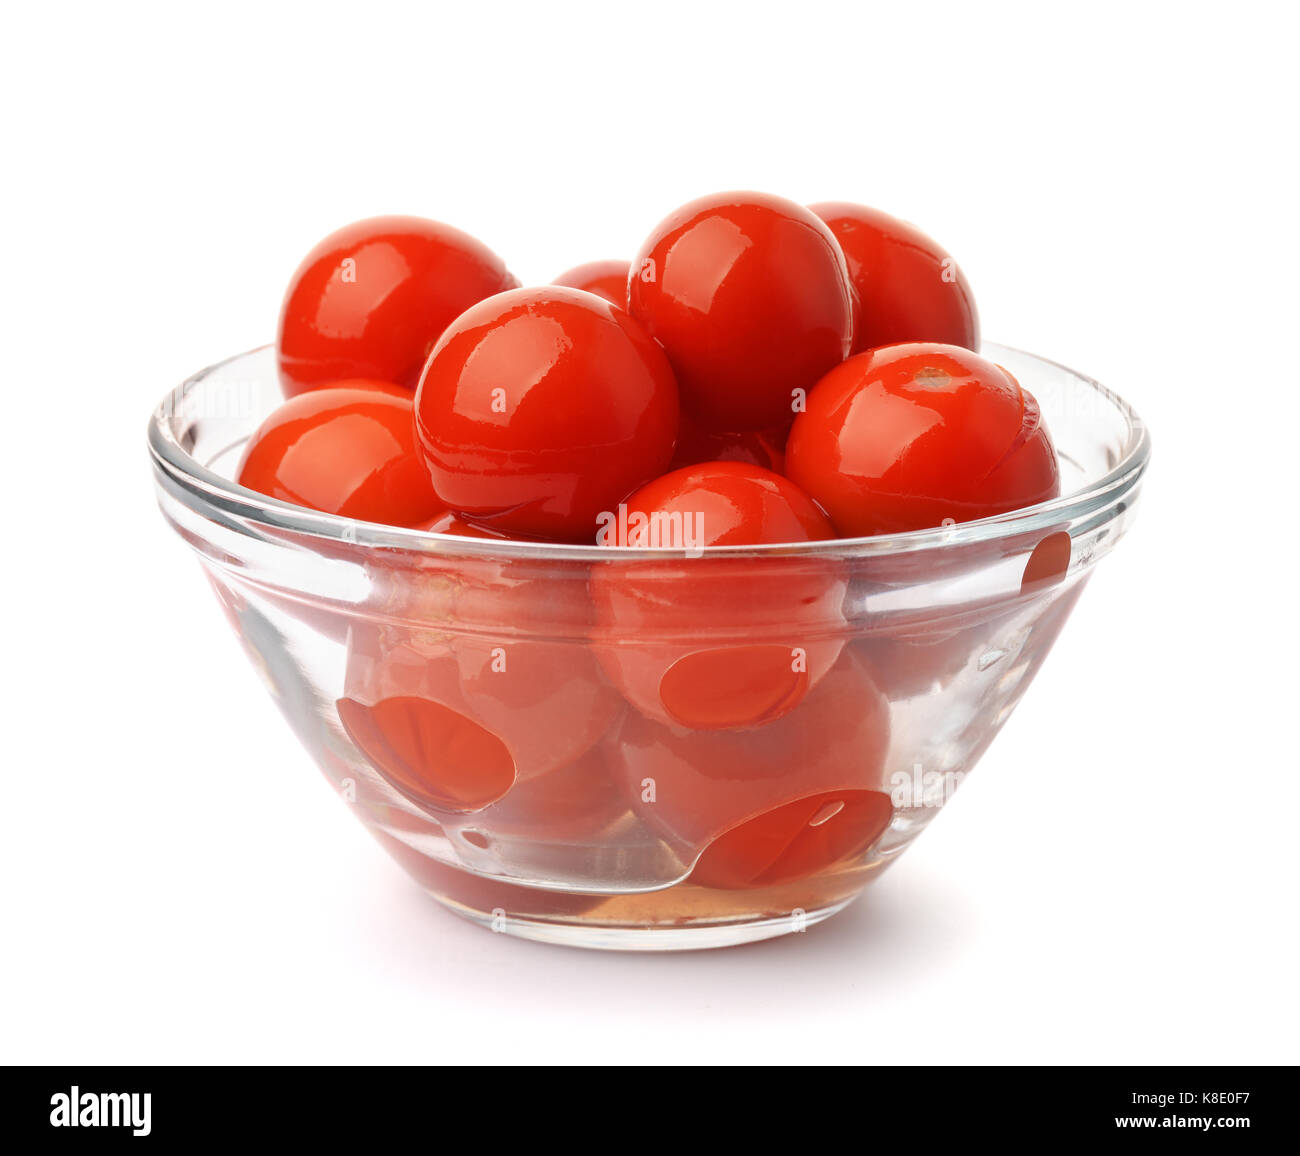 Pickled tomatoes in glass bowl solated on white Stock Photo